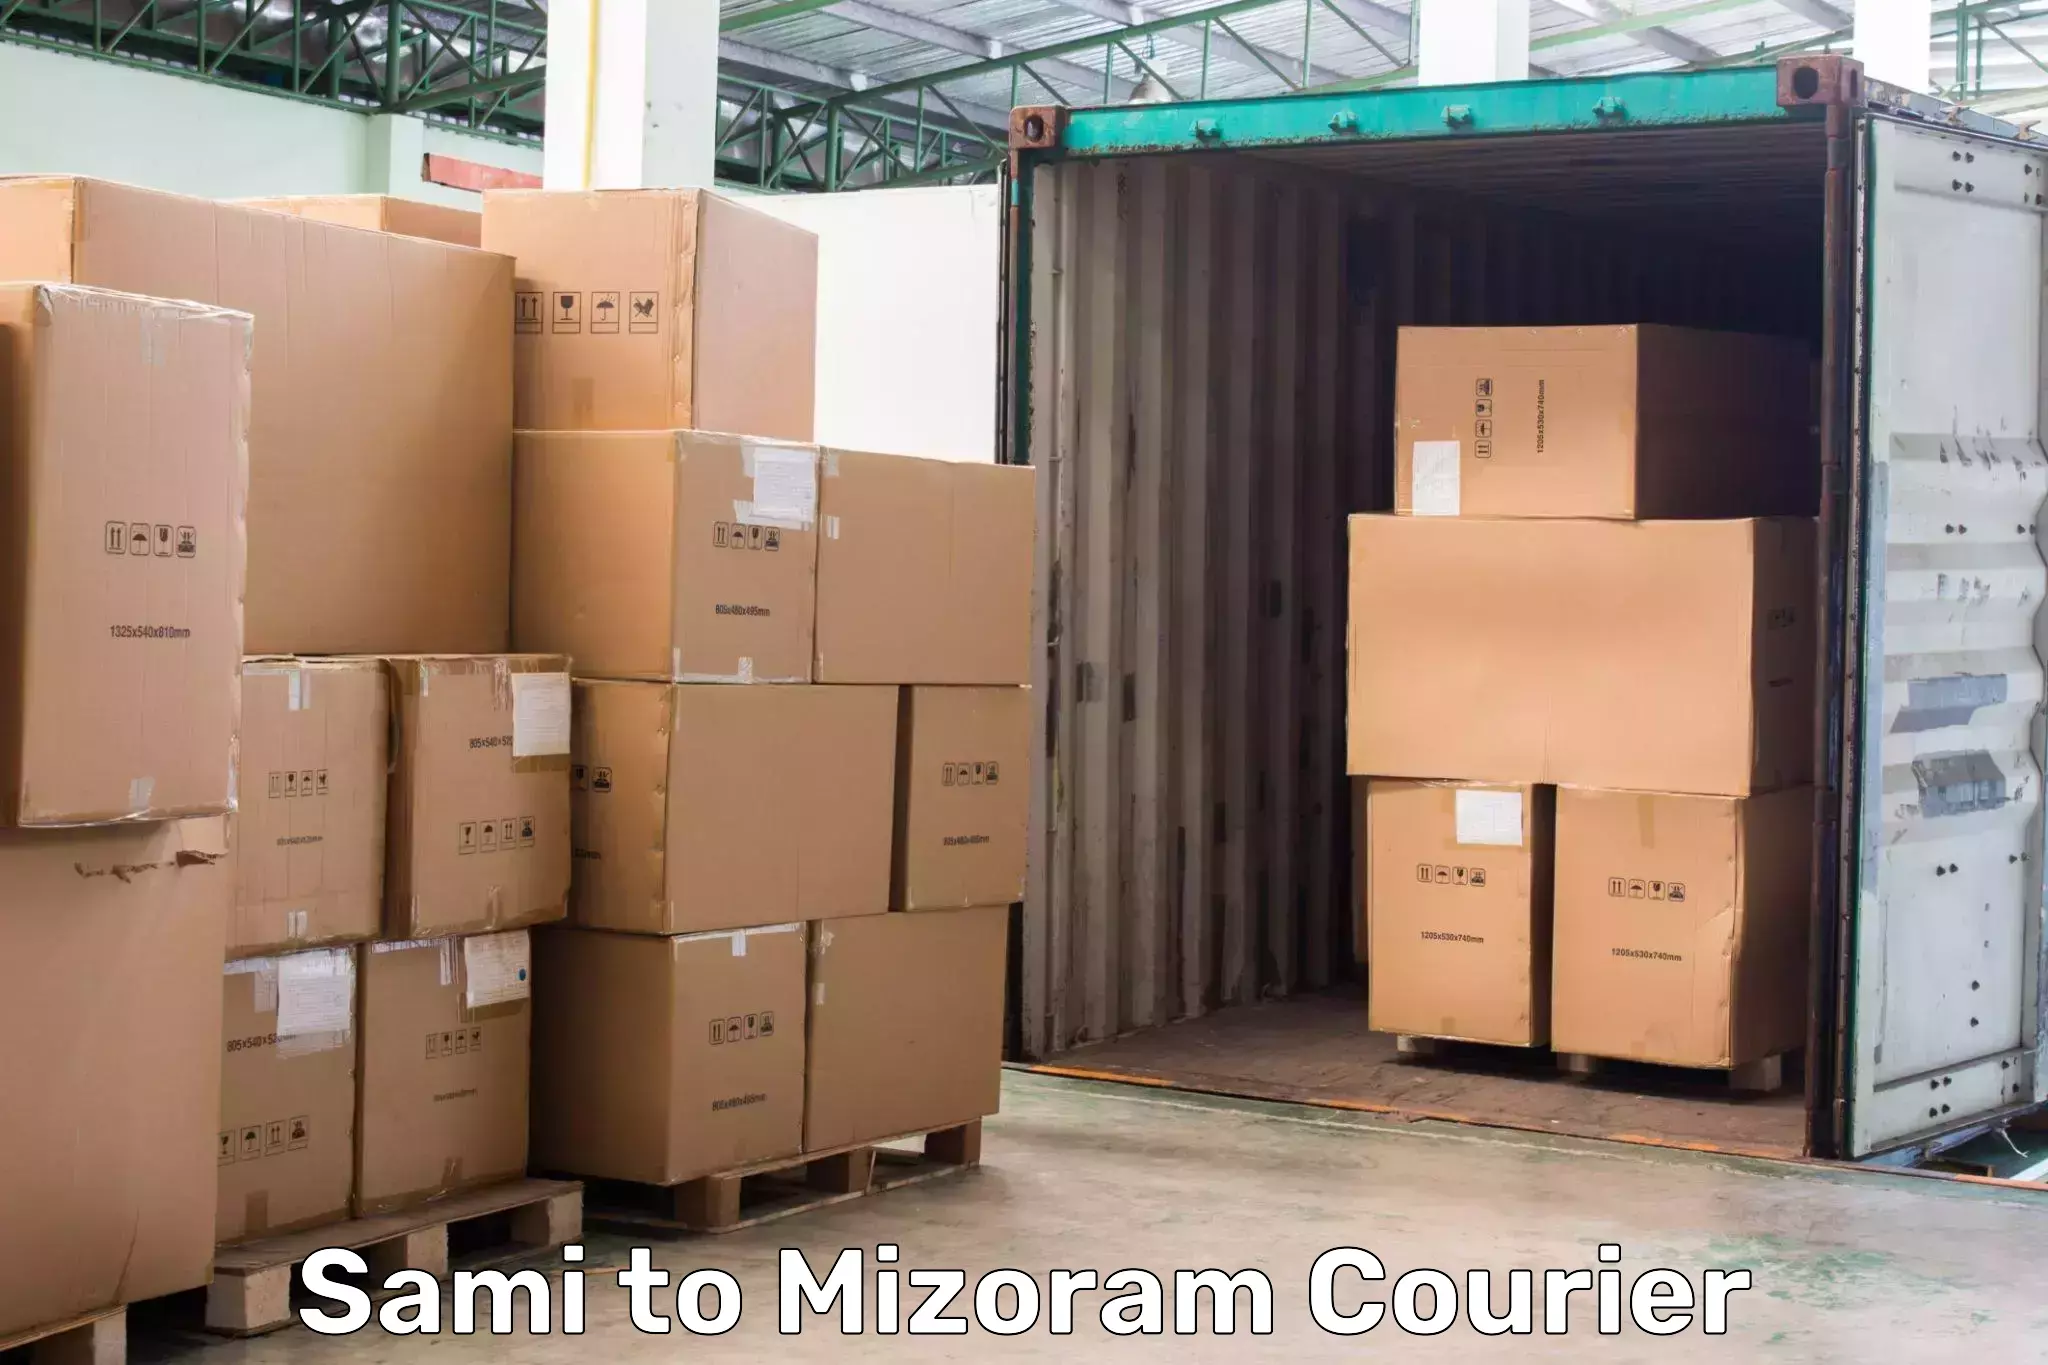 End-to-end delivery Sami to Mizoram